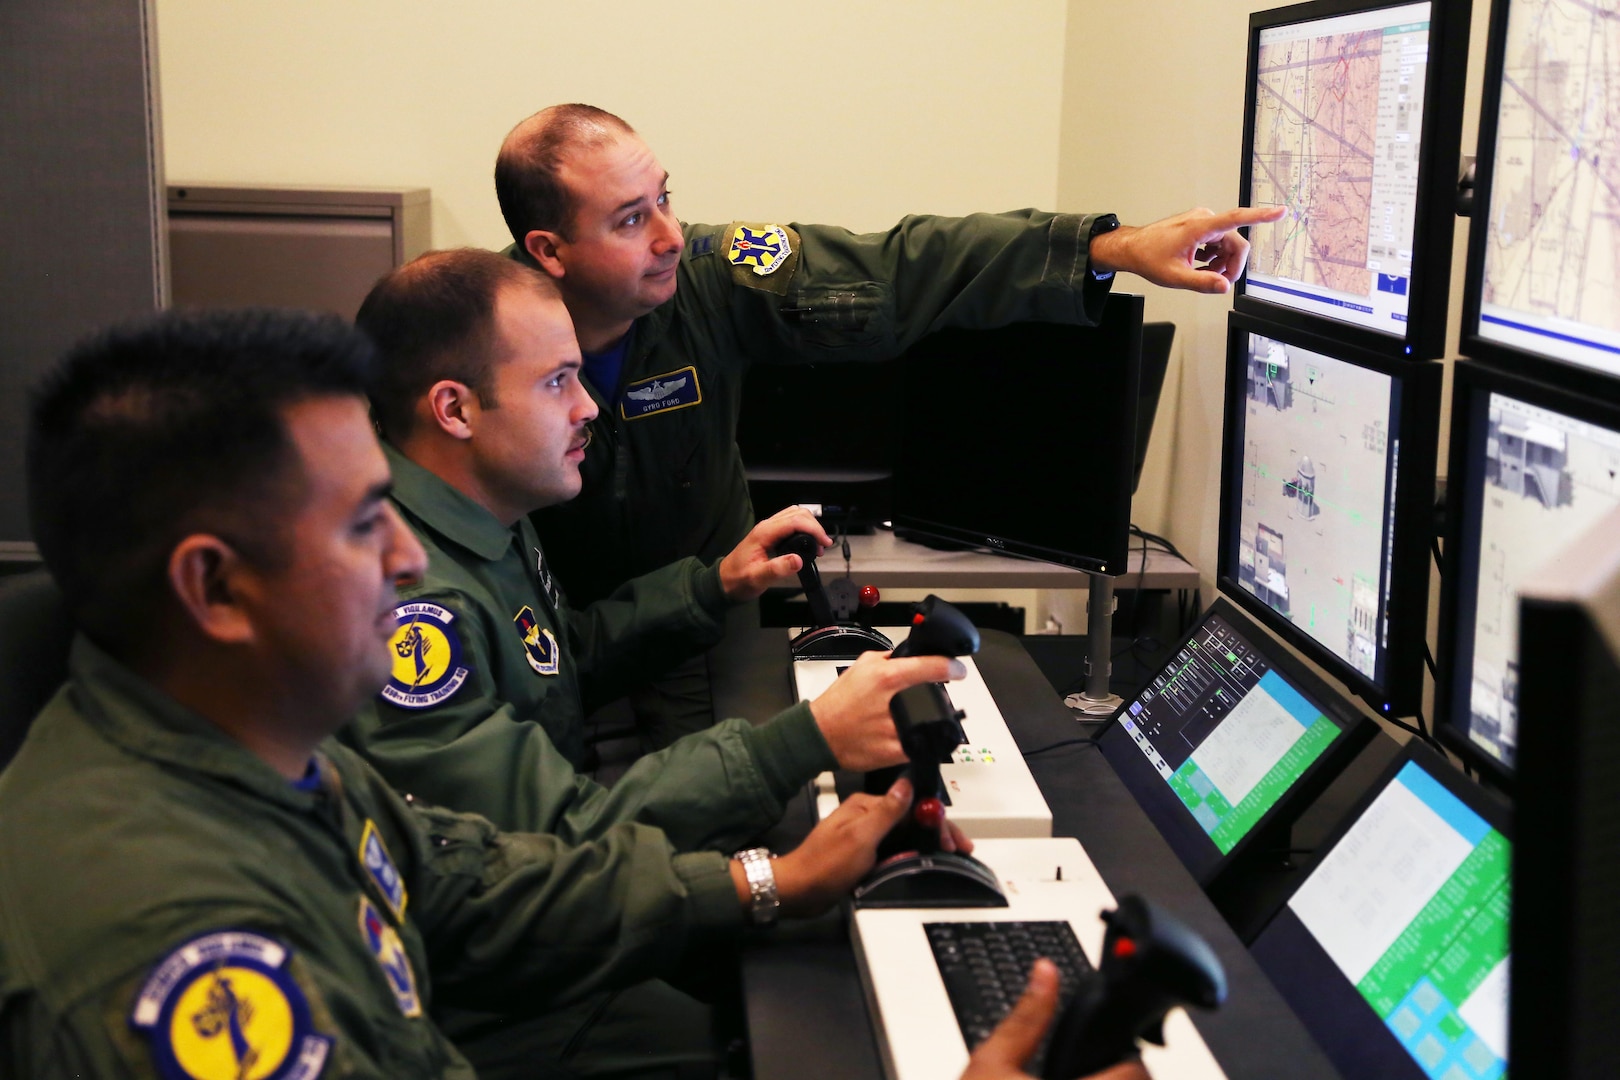 Front to back: Staff Sgt. Jesus, 558th Flying Training Squadron sensor operator instructor, and 2nd Lt. James, 558th FTS Remotely Piloted Aircraft pilot trainee, are instructed by Capt. Gary, 558th FTS instructor pilot on weapons employment procedures. 